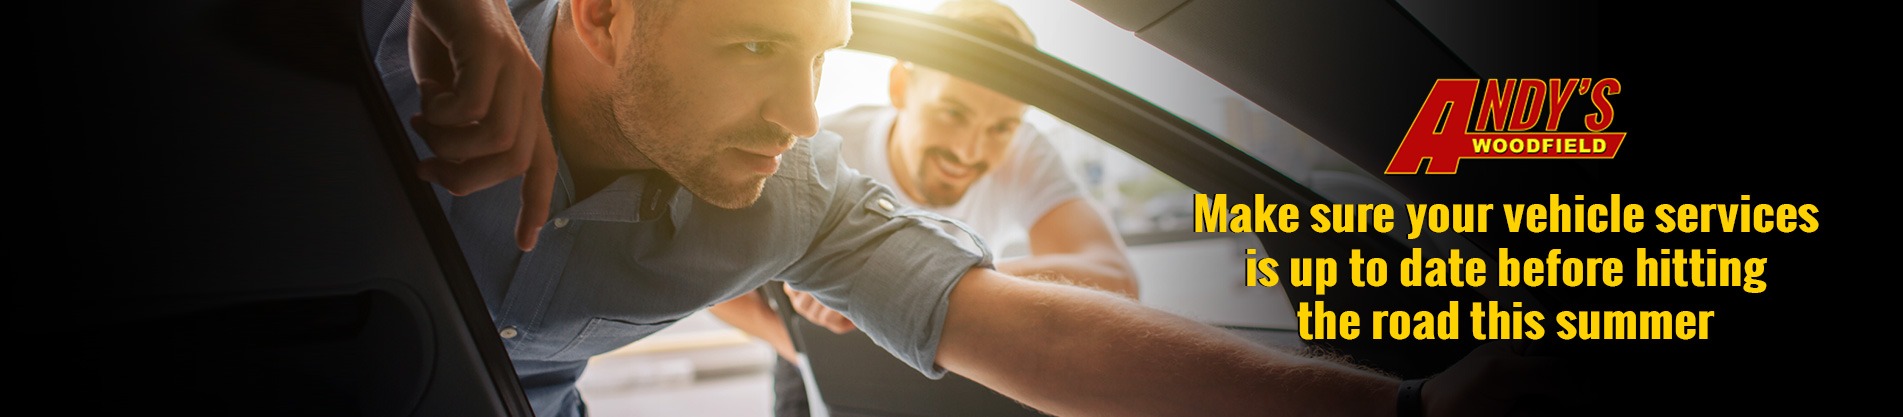 Make sure your vehicle services is up to date before hitting the road this summer